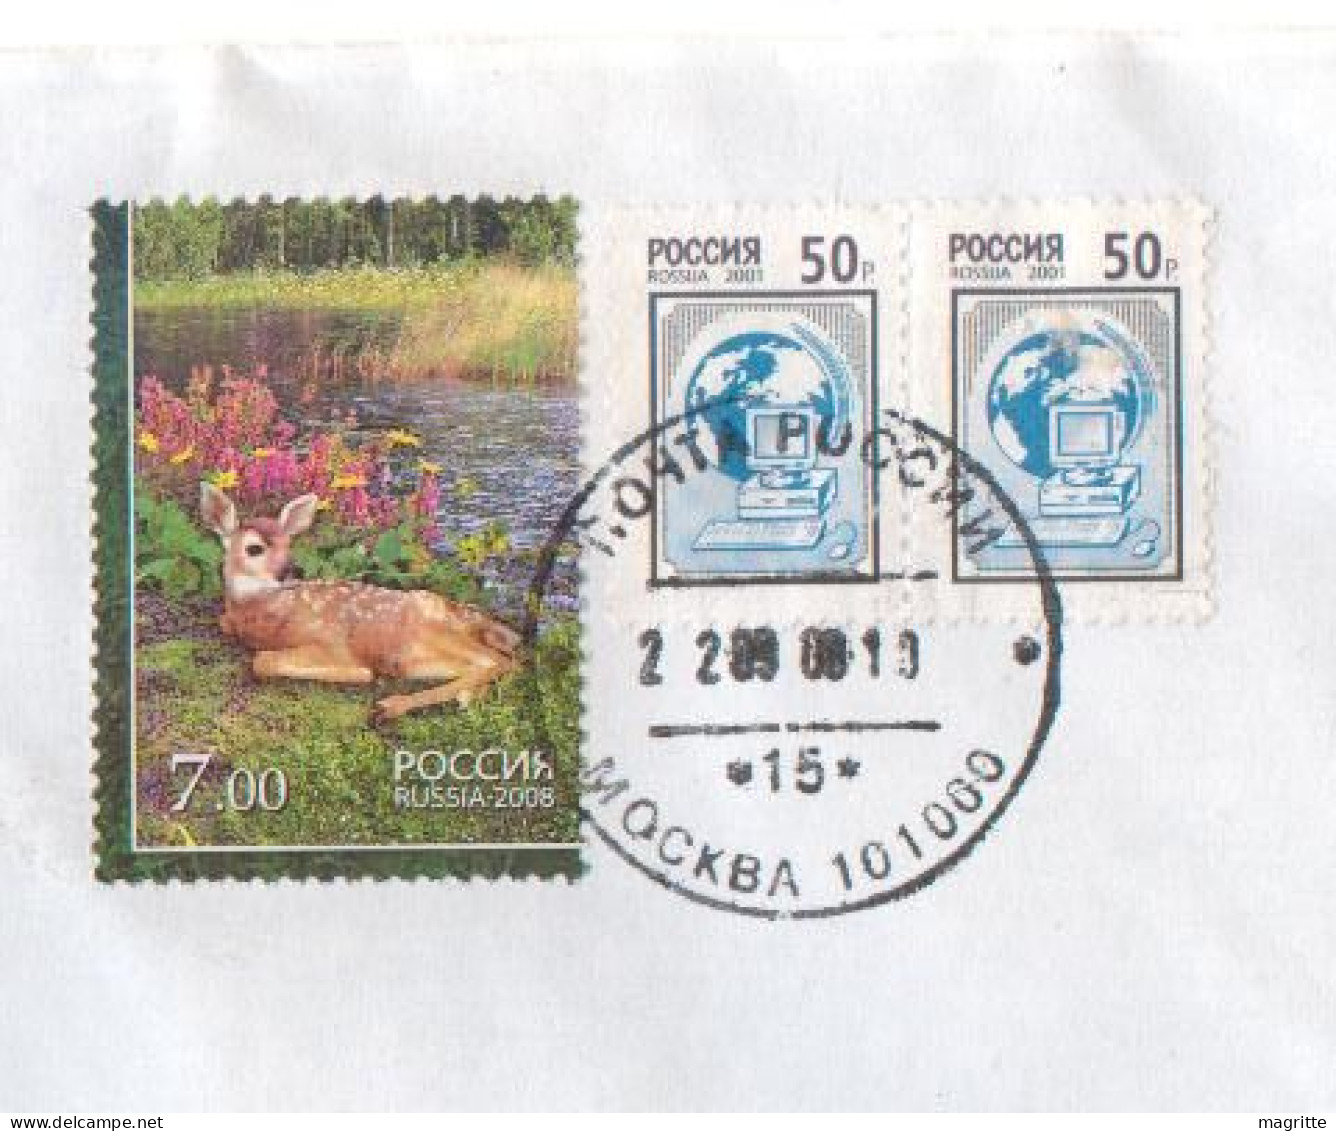 Russie Faon 2008 Lettre Recommandée Pour La France Biche Cerf Bambi - Russia 2008 Fawn Registred Letter To France - Game